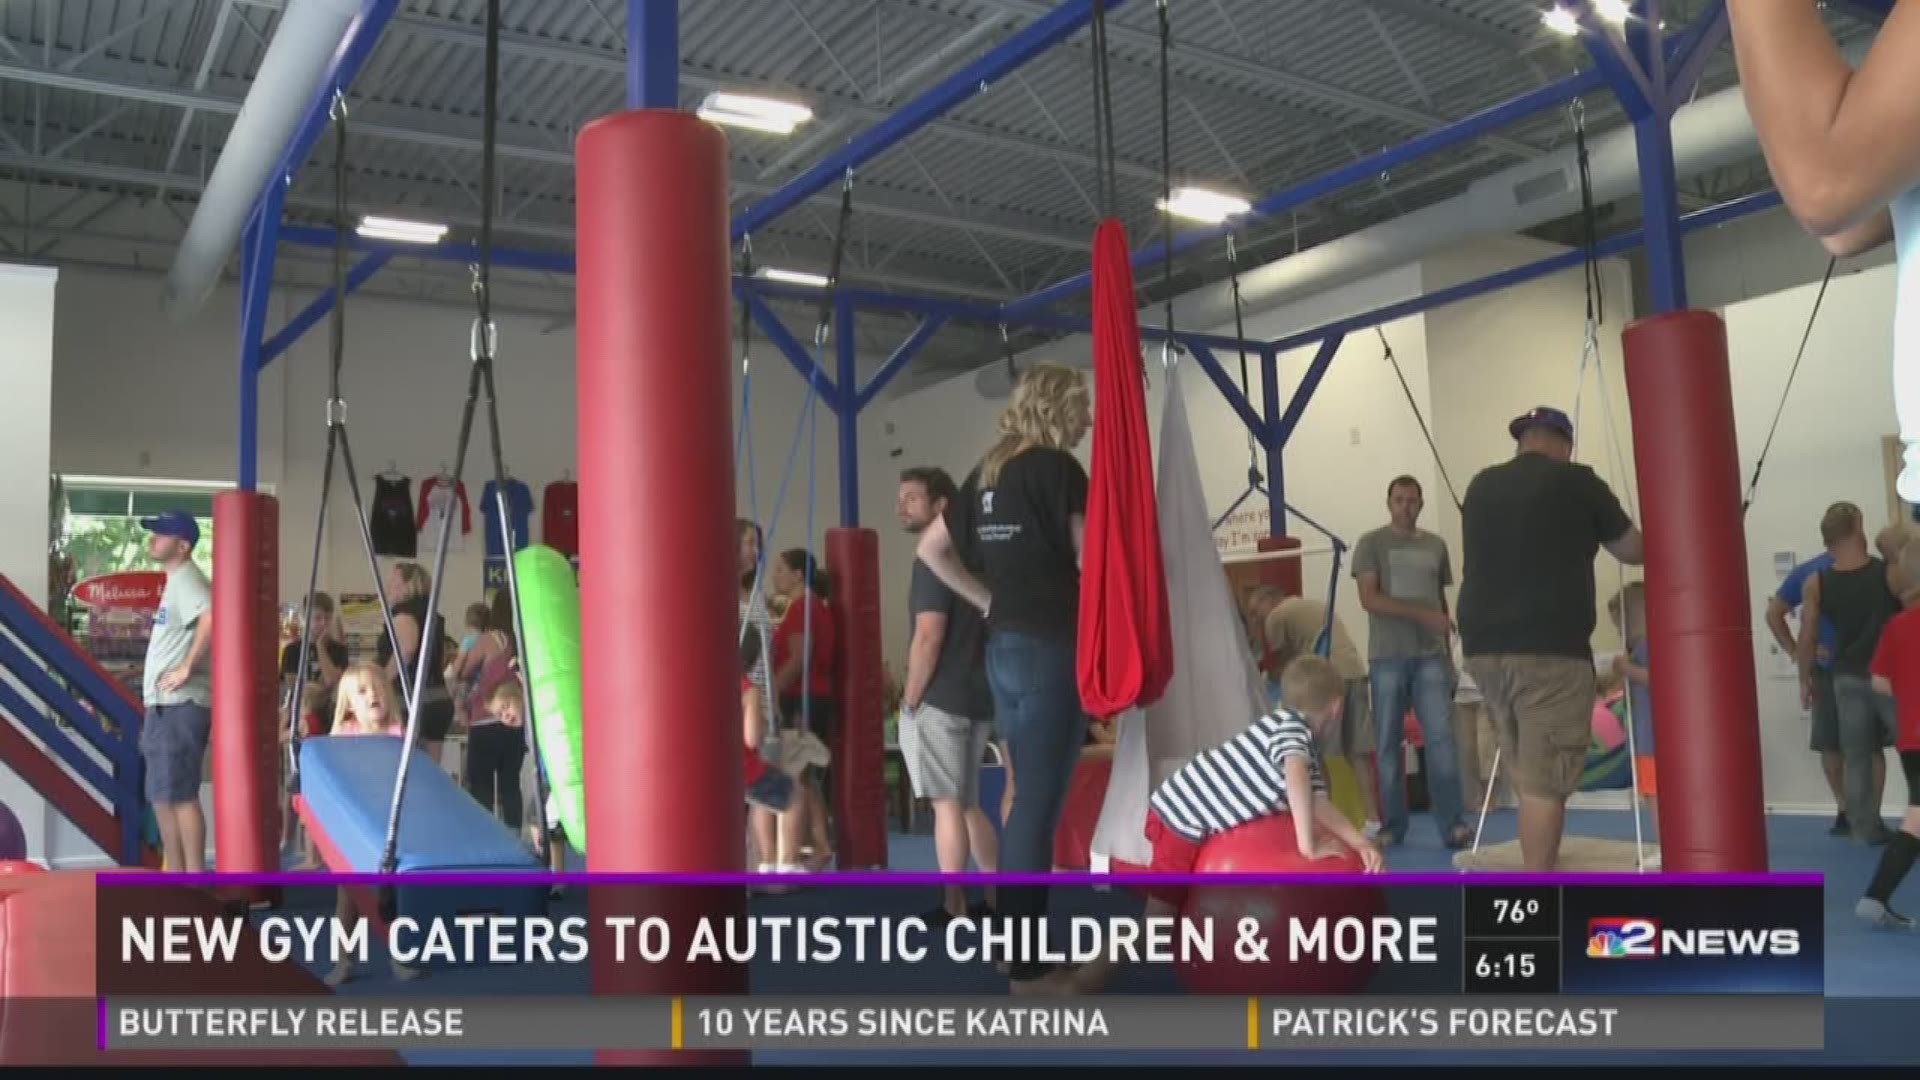 New Gym Caters to Autistic Children & More